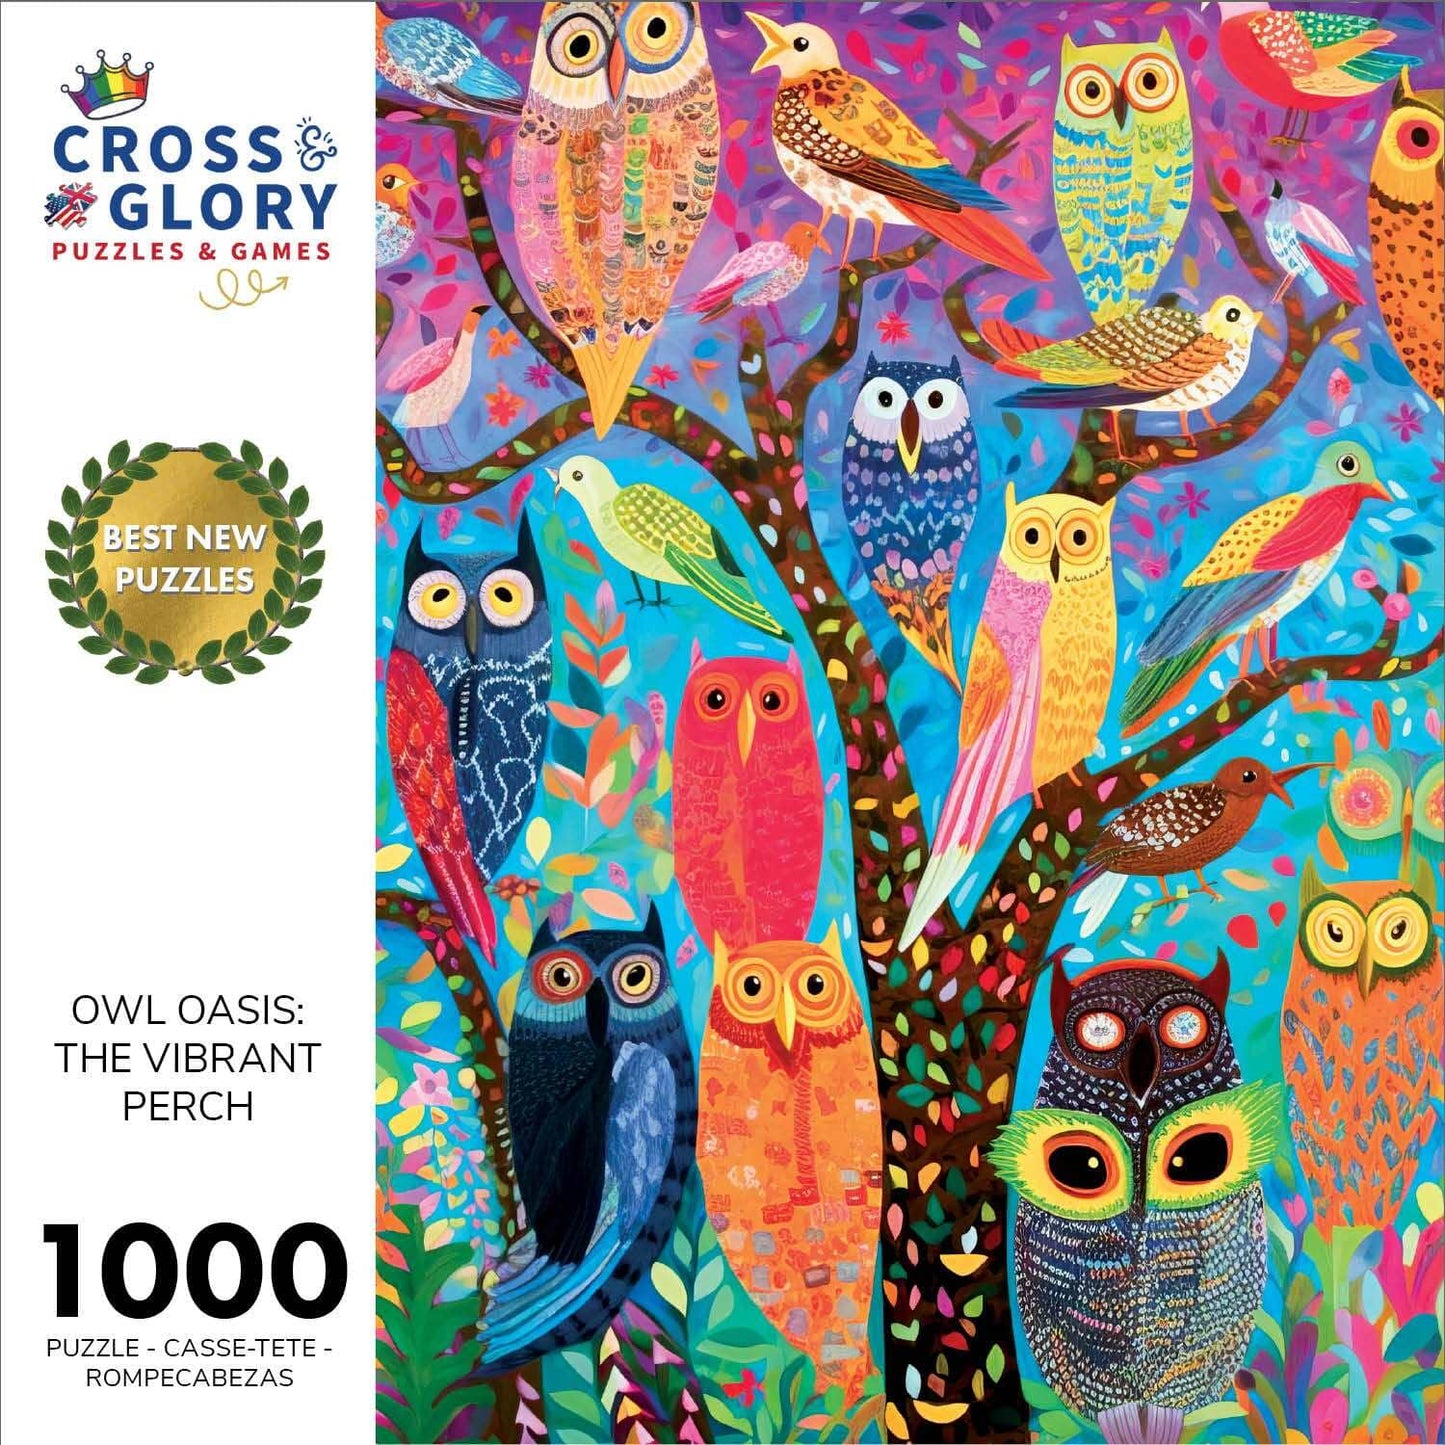 Owl Oasis: The Vibrant Perch - 1000 Piece Jigsaw Puzzle Jigsaw Puzzles Cross & Glory